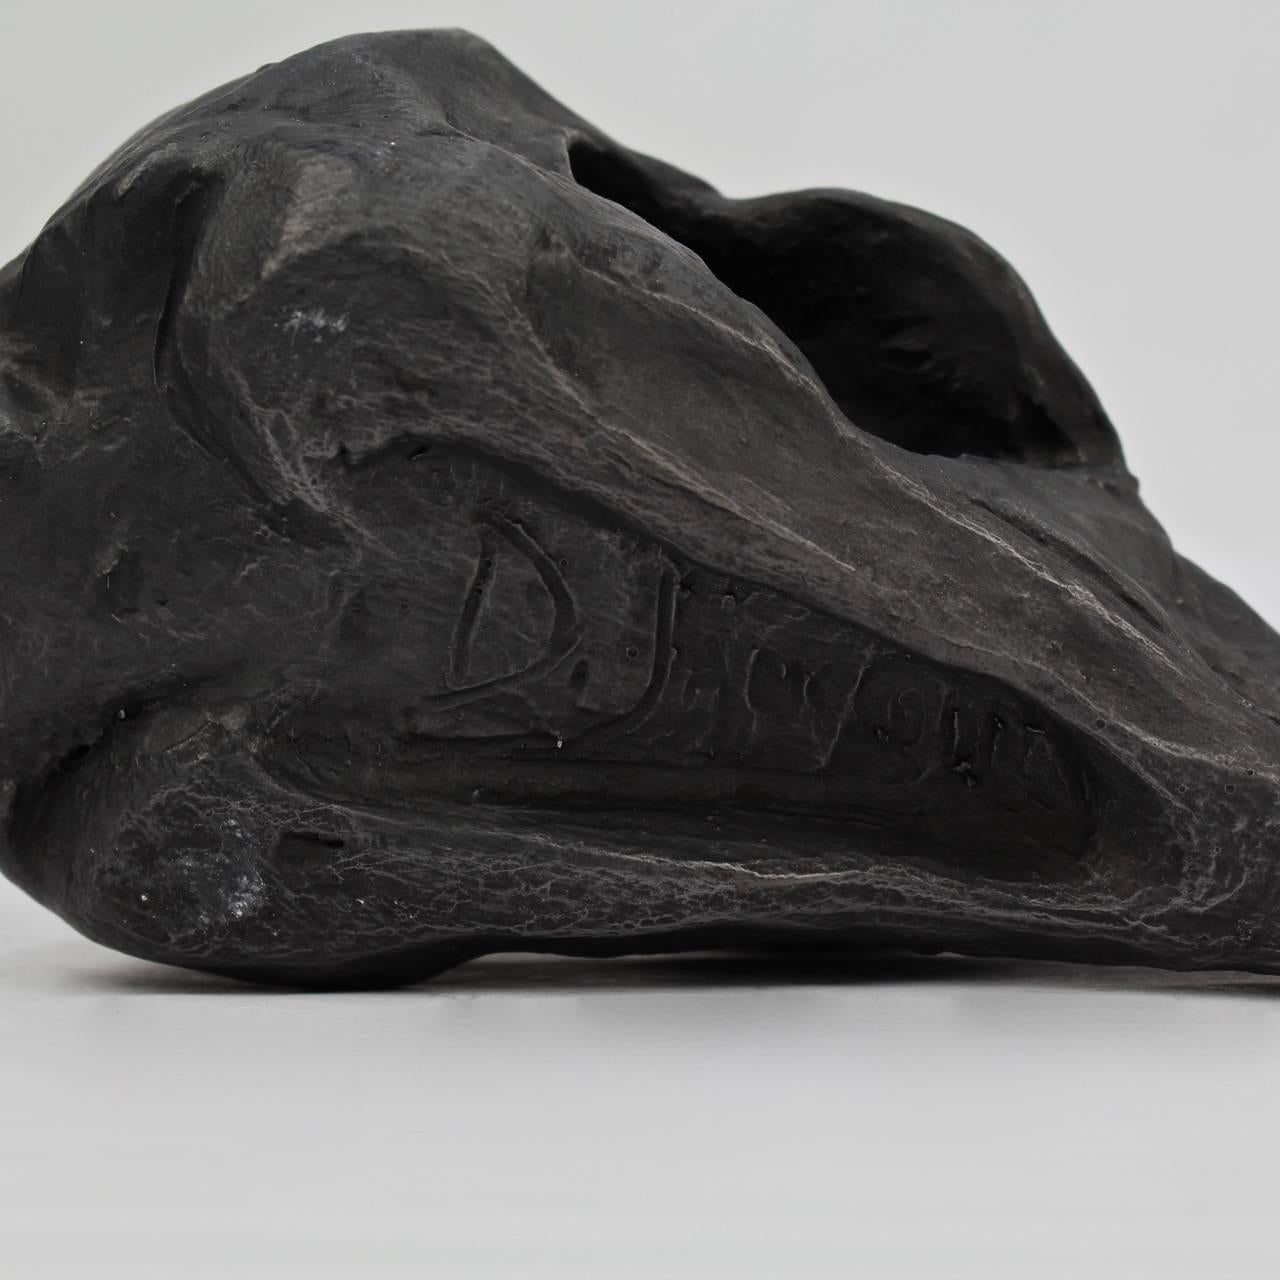 Unique Black Painted Terracotta Sculpture of a Hawk Skull by Darla Jackson, 2016 For Sale 1